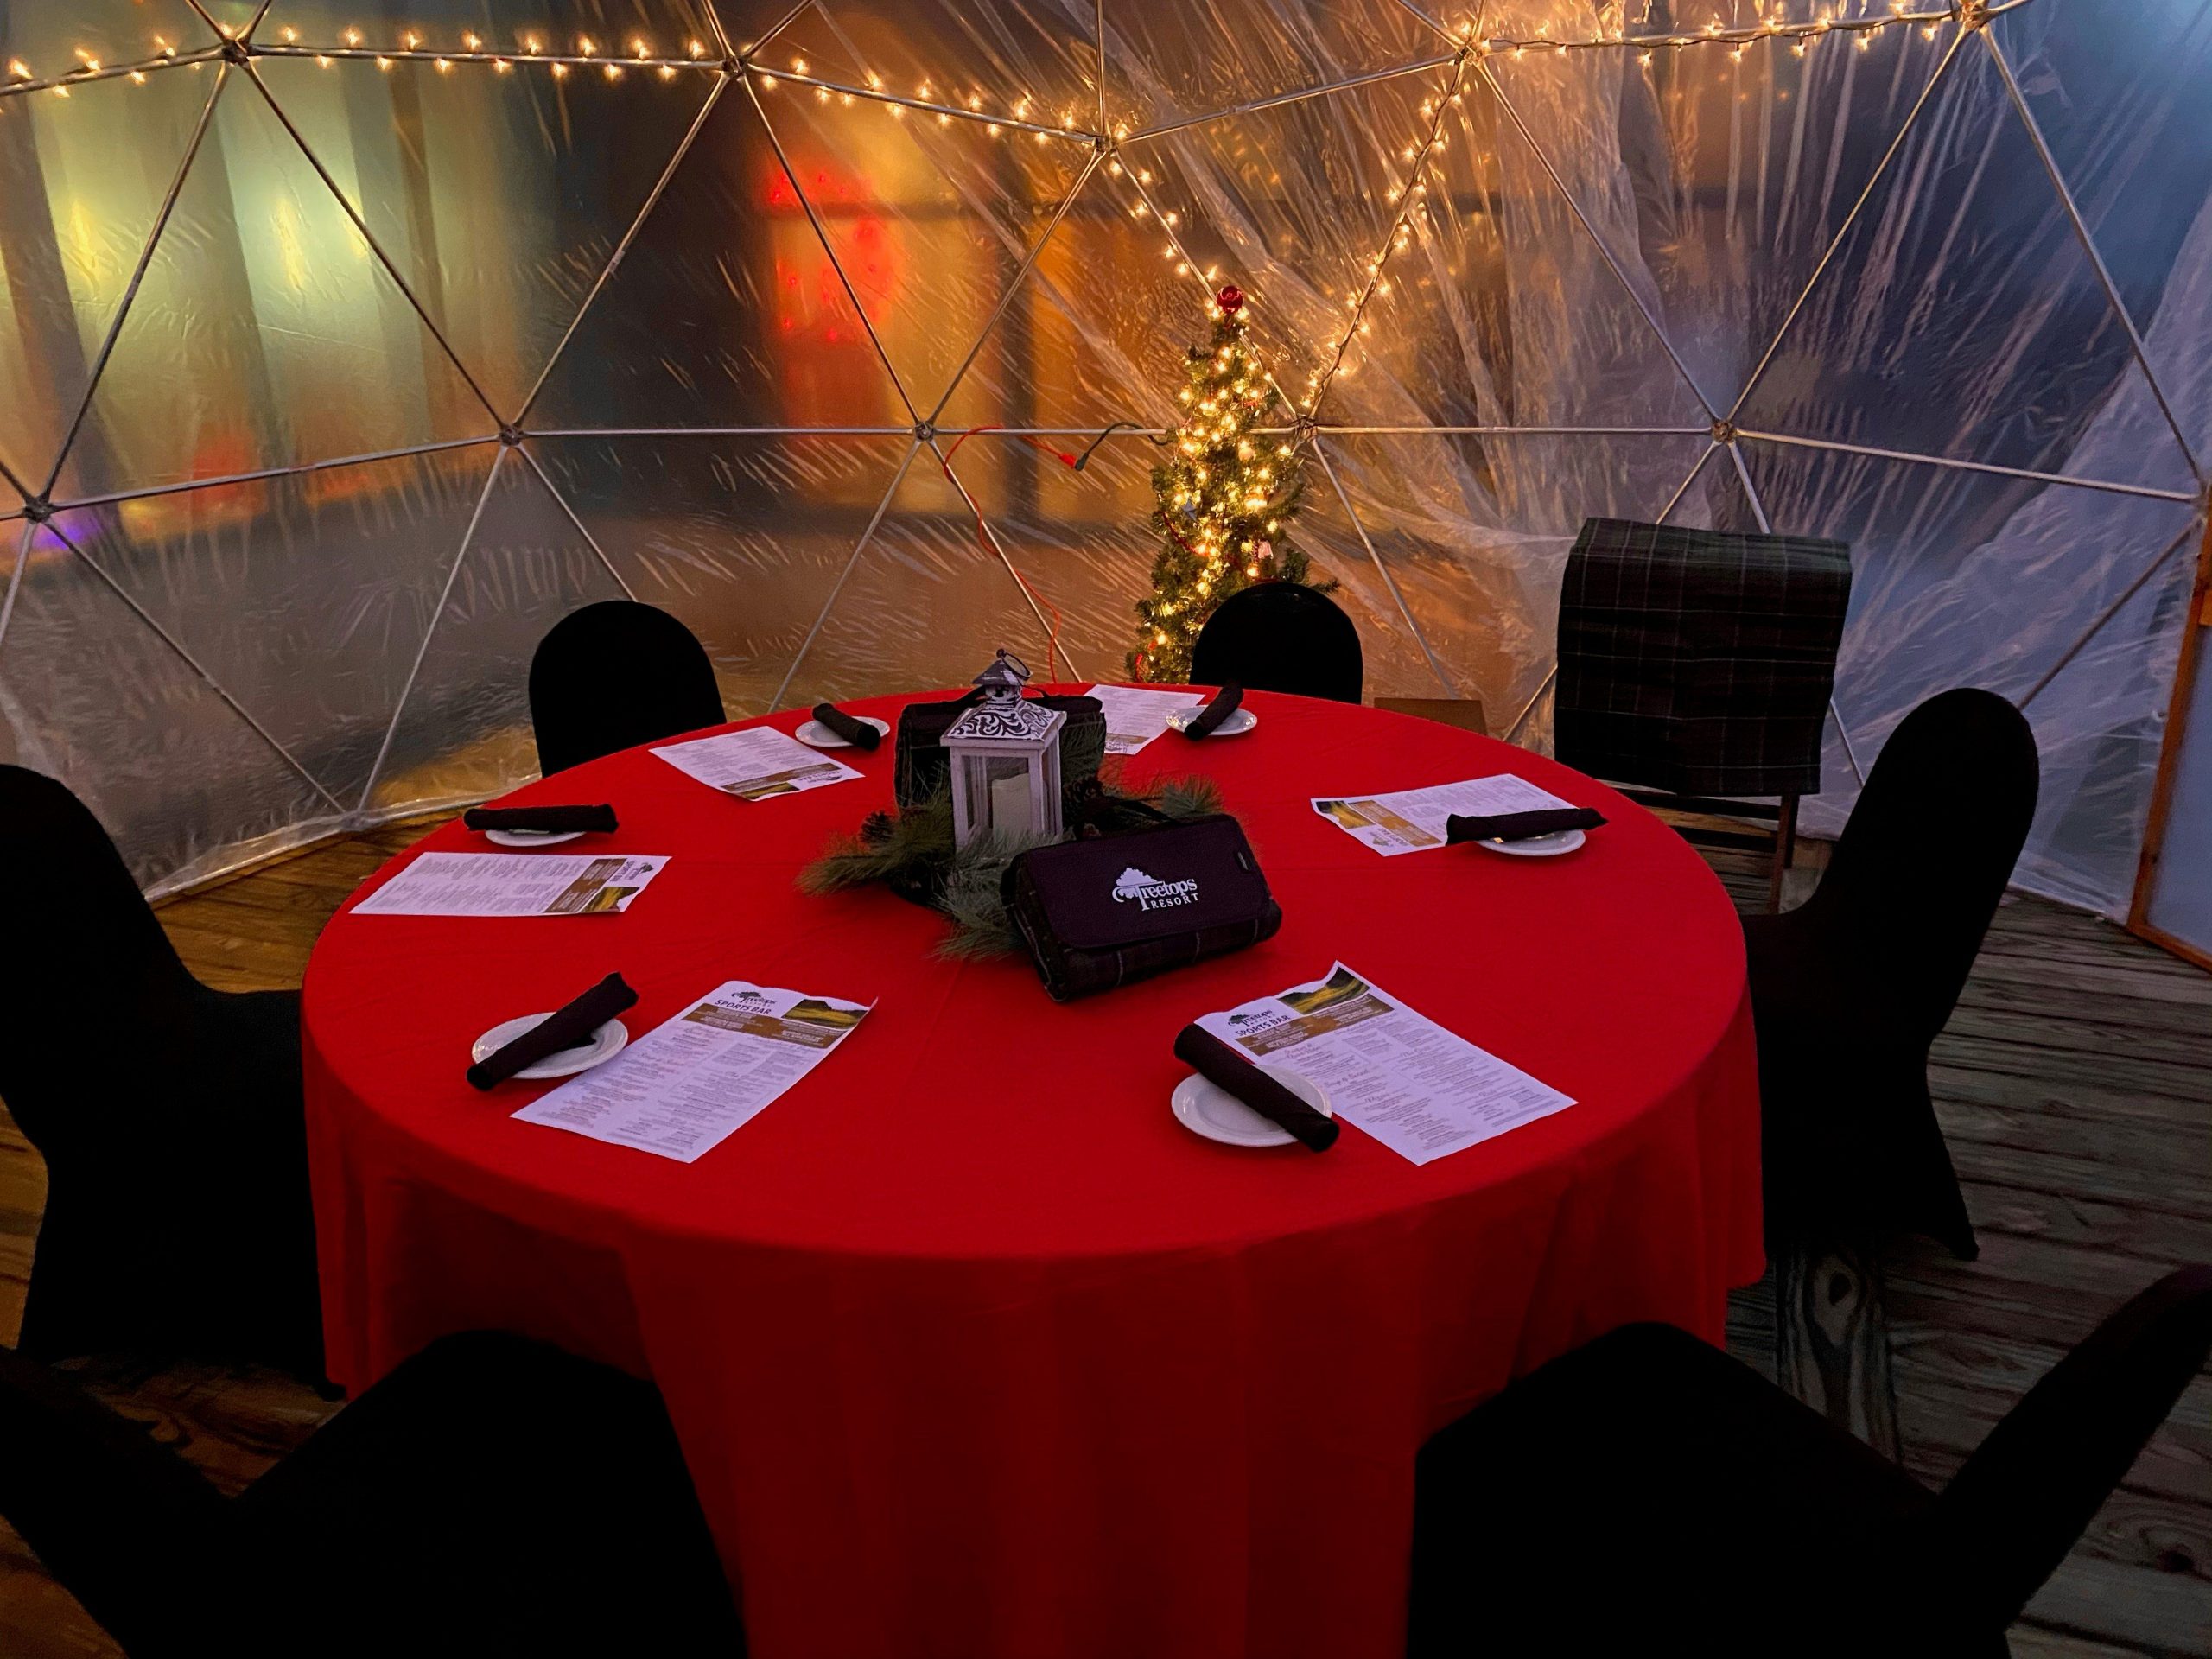 A dining igloo at Treetops Resort with red tablecloth, string lights, and space for six family members to enjoy a delicious meal.